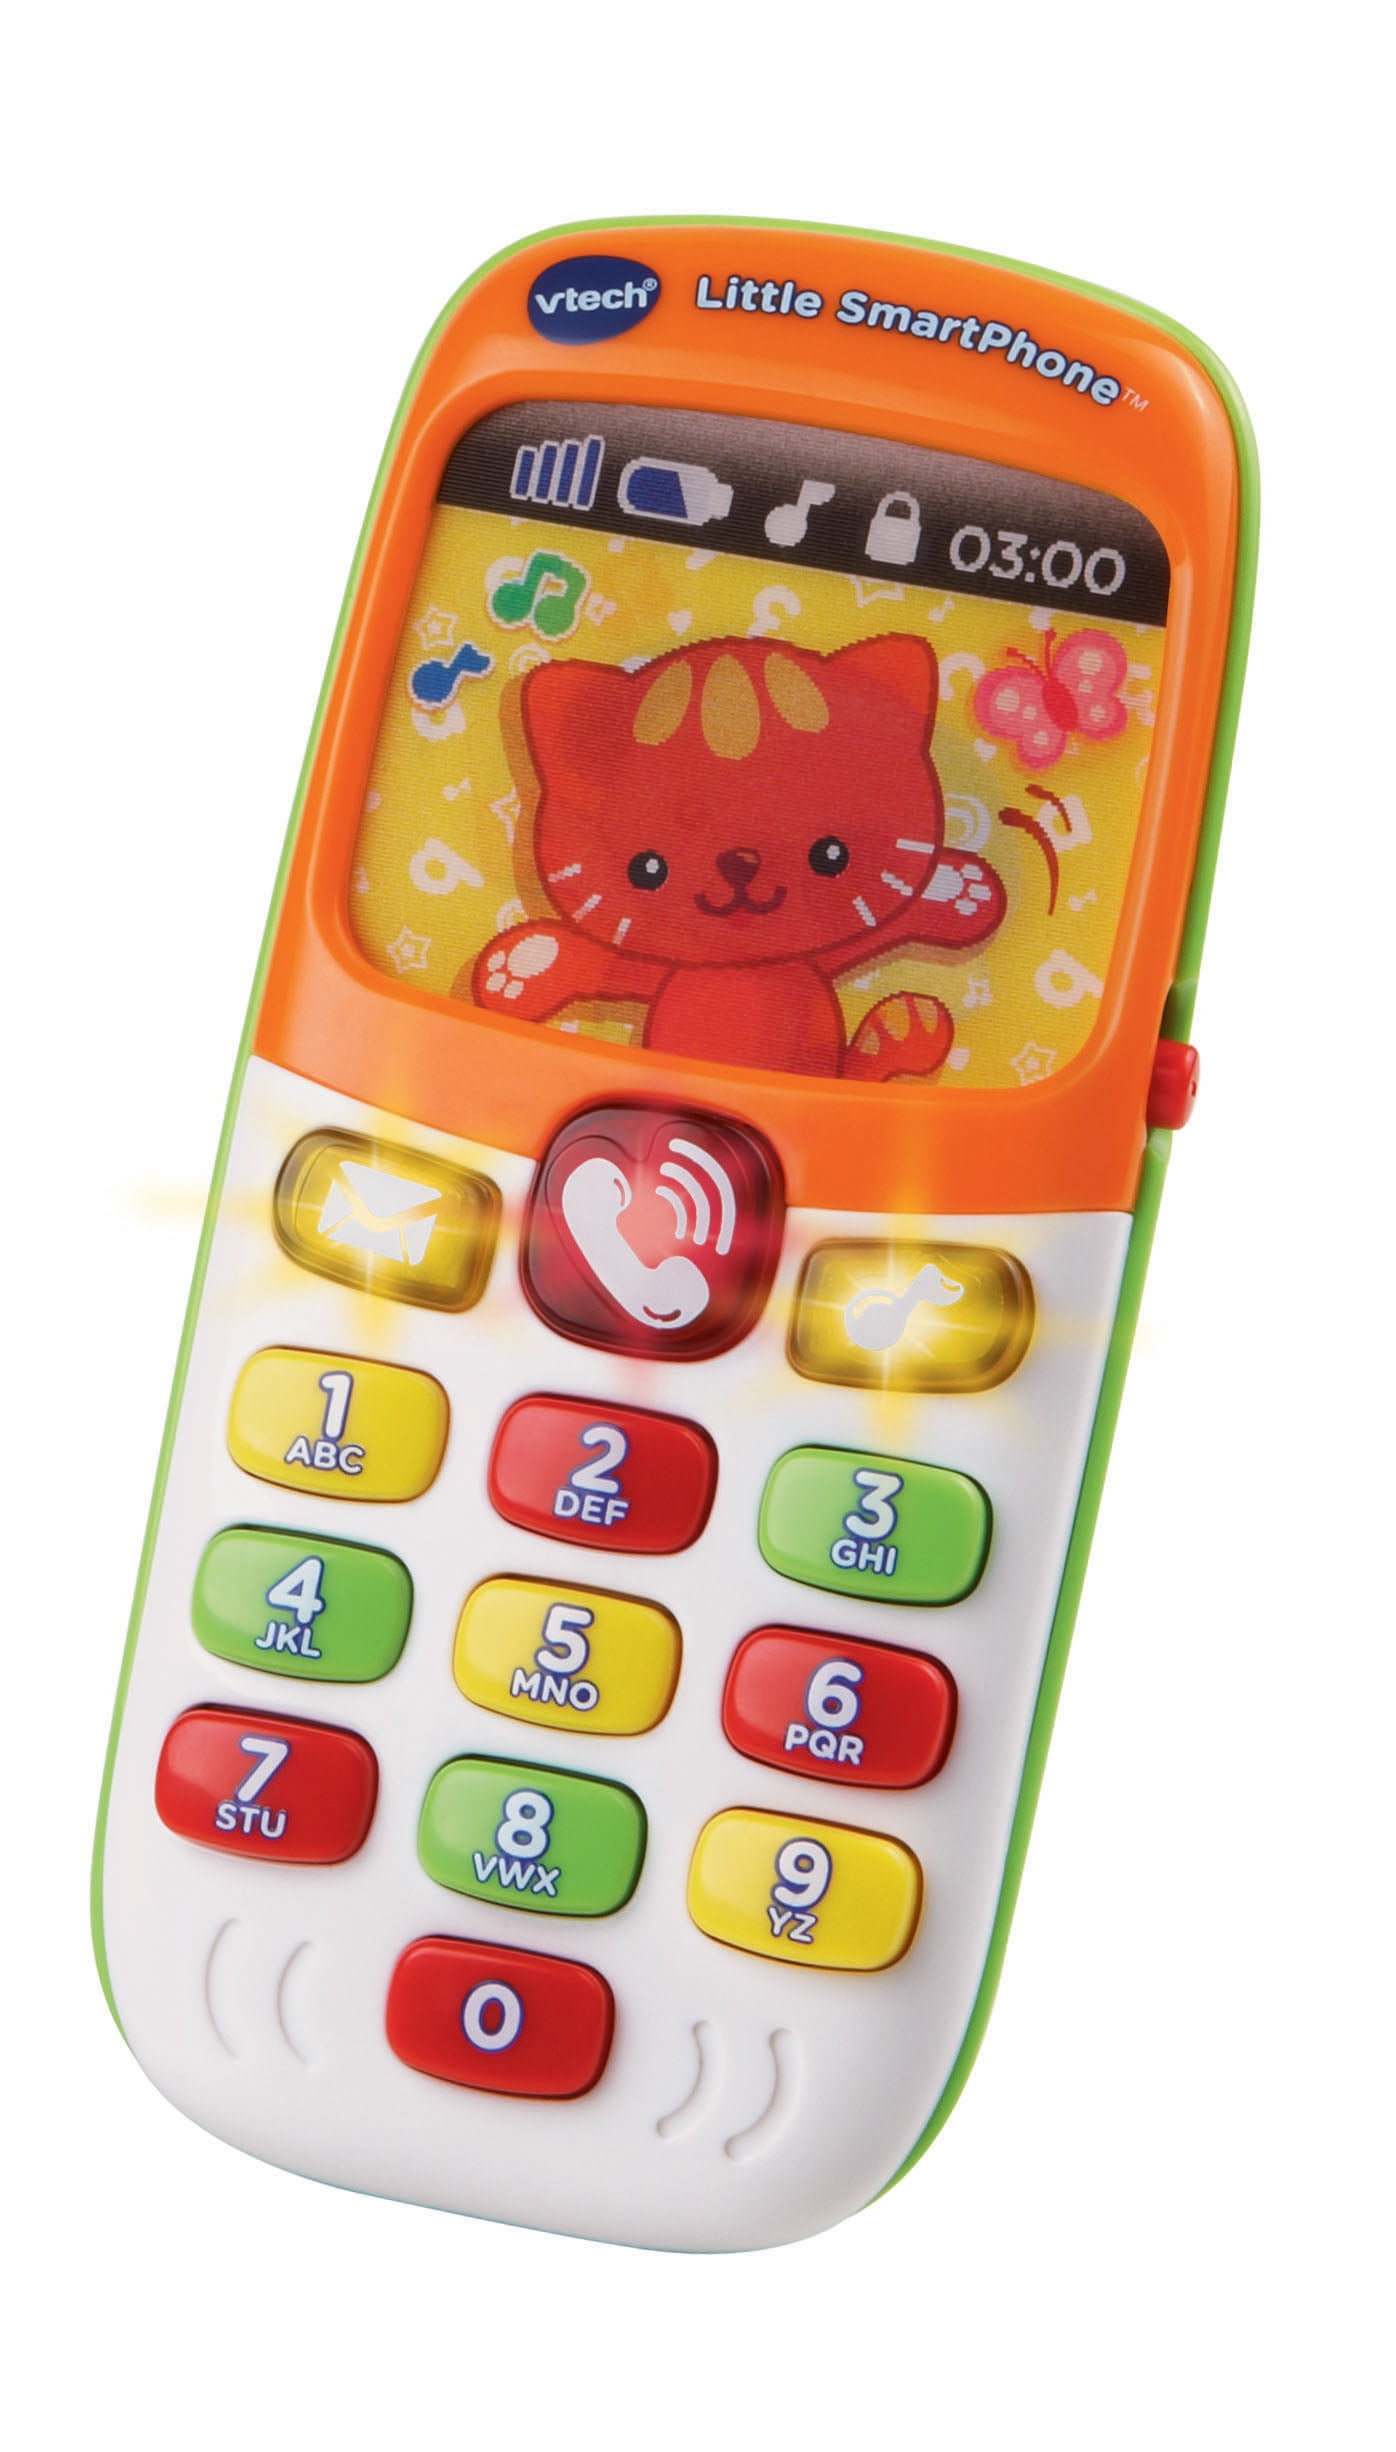 VTech Little SmartPhone, Teaches Numbers and Colors, Great Toy for Baby, Walmart Exclusive